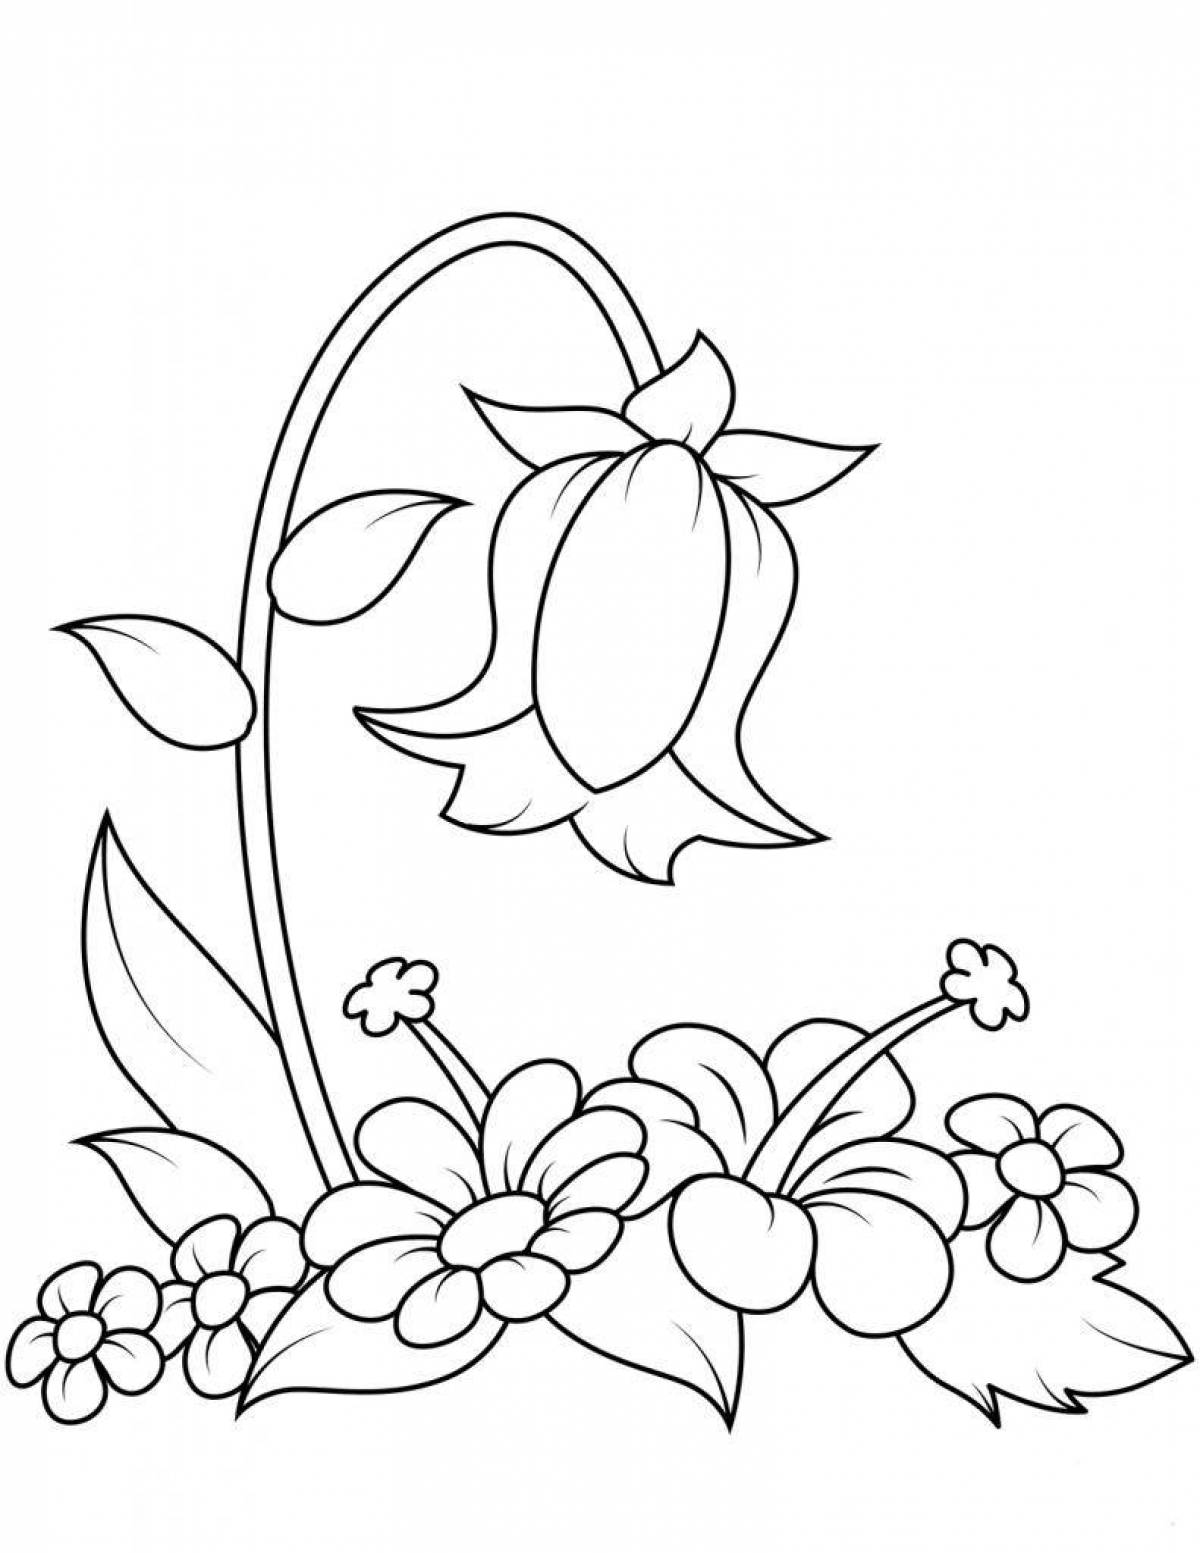 Exquisite flower bell coloring page